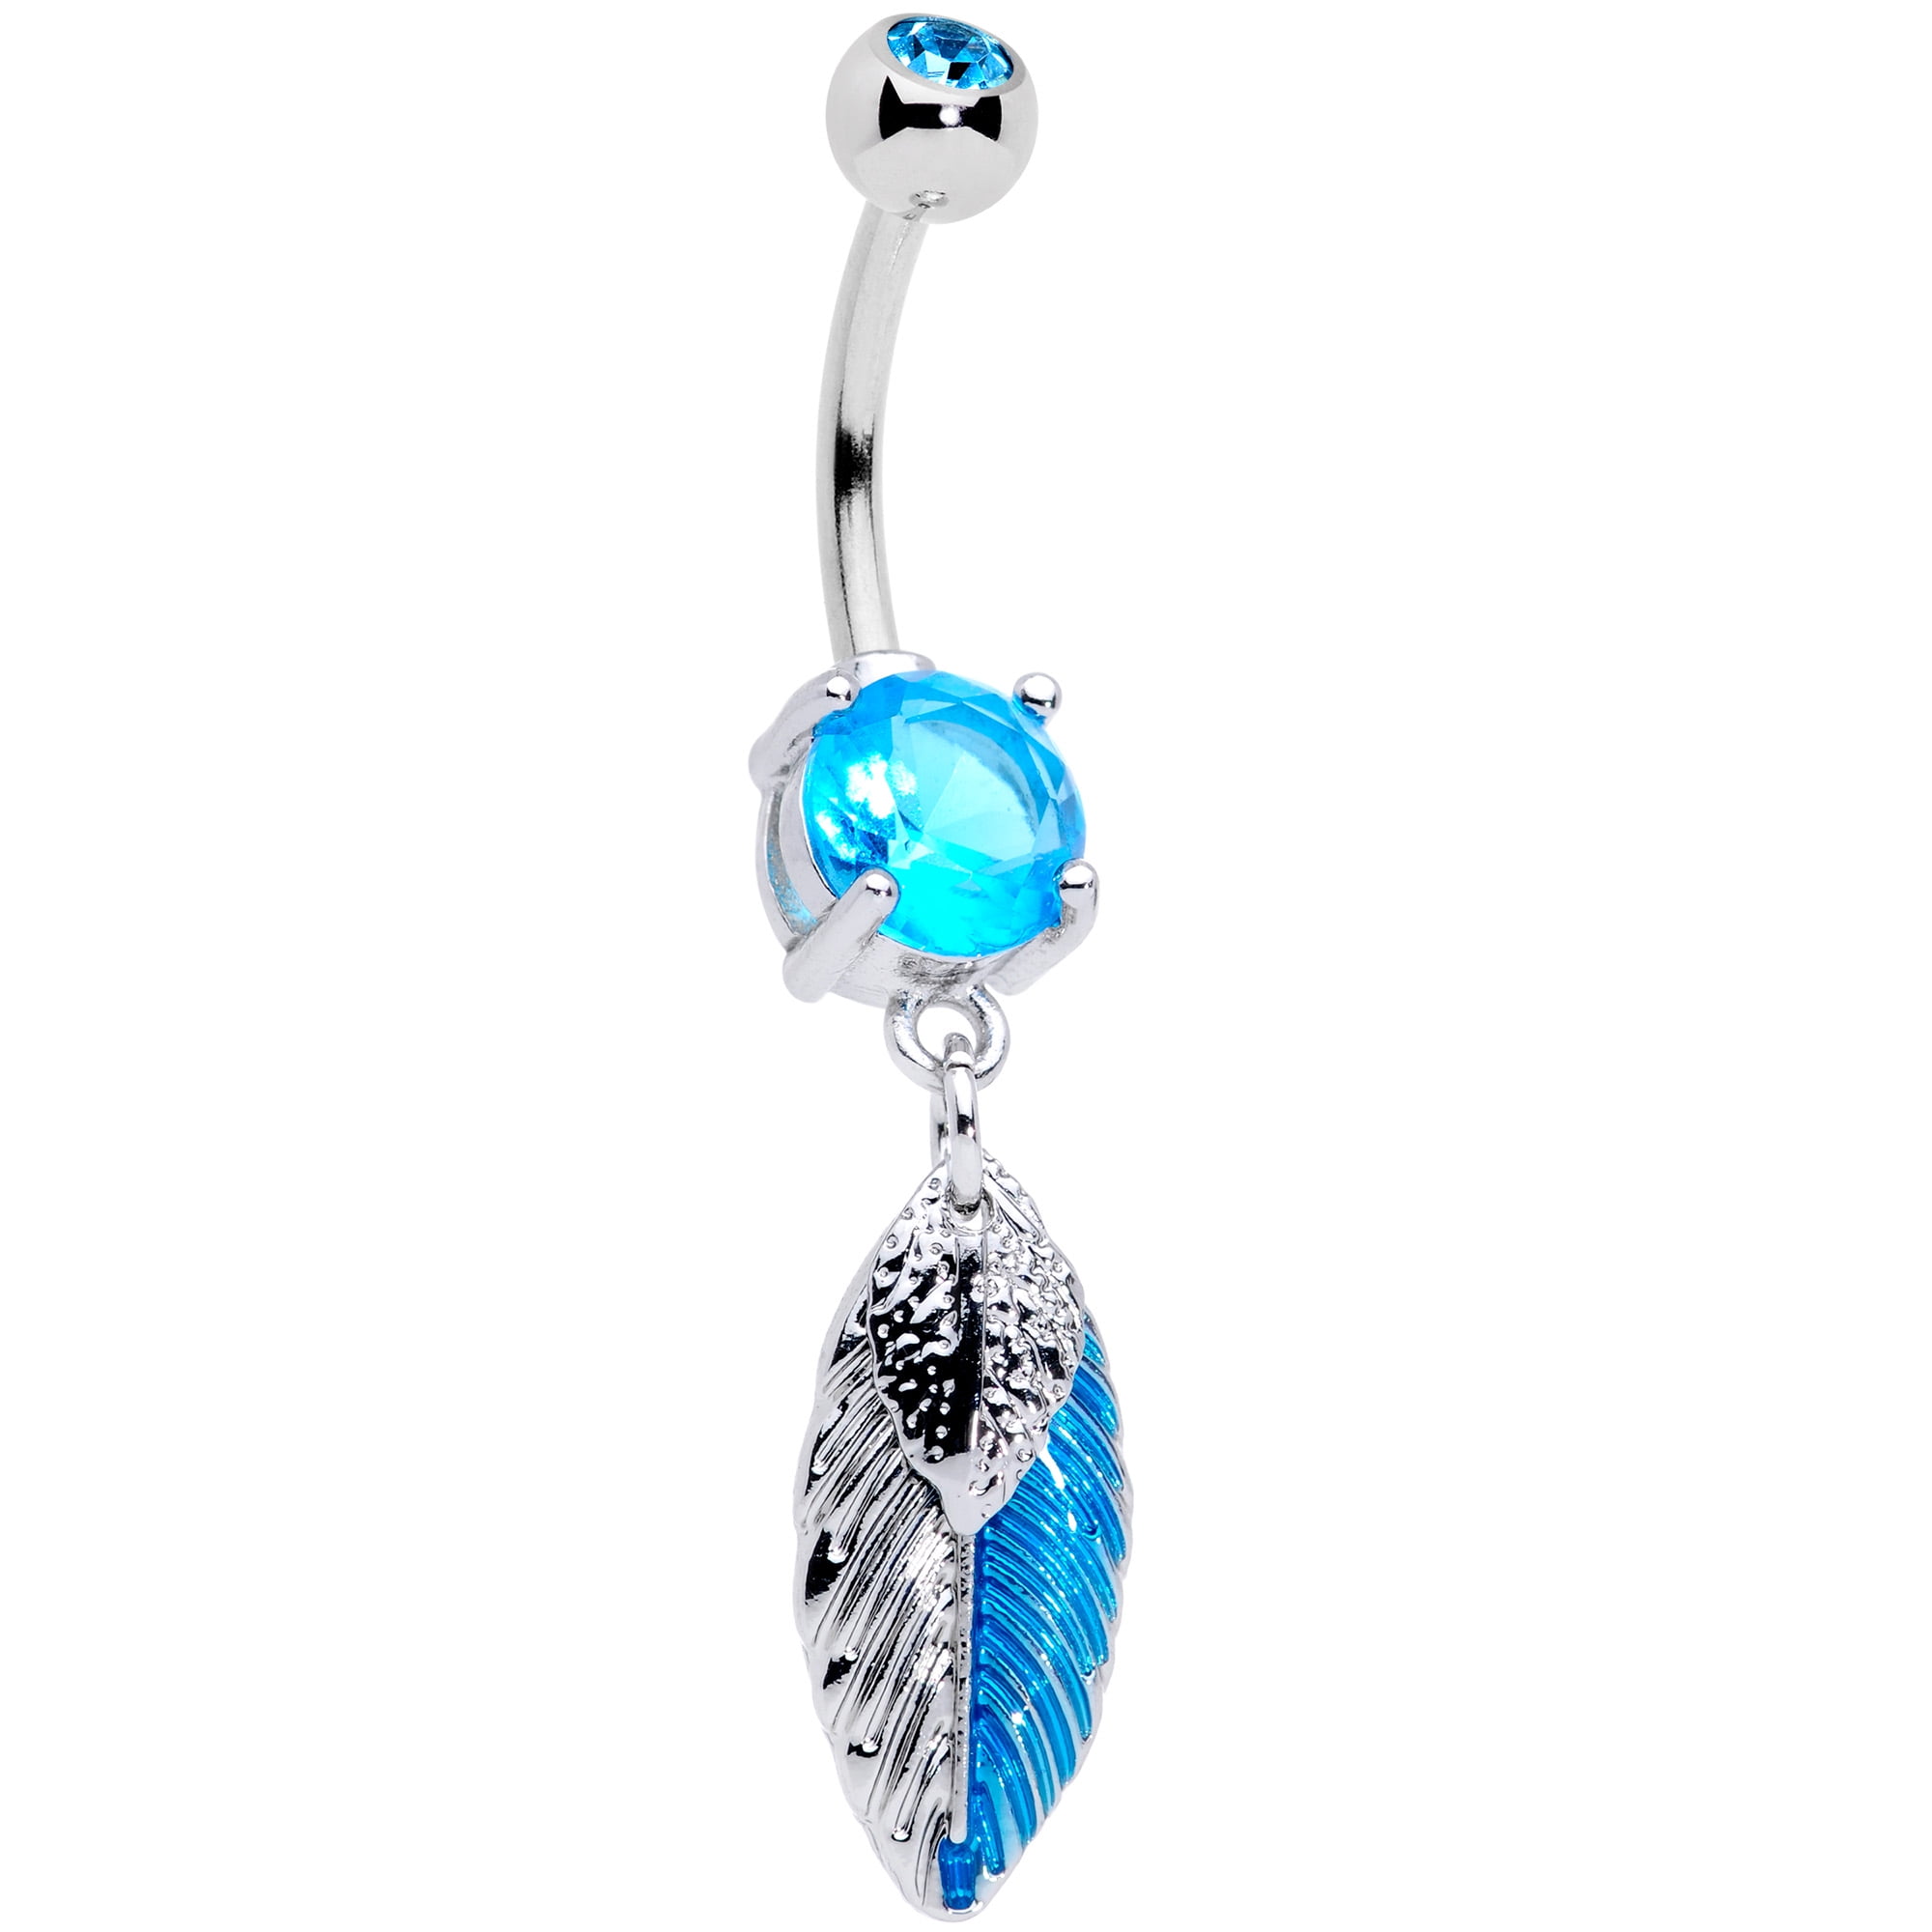 Blue Party Cupcake Dangle Banana Belly Barbell Button Navel Ring Body Jewelry q1 